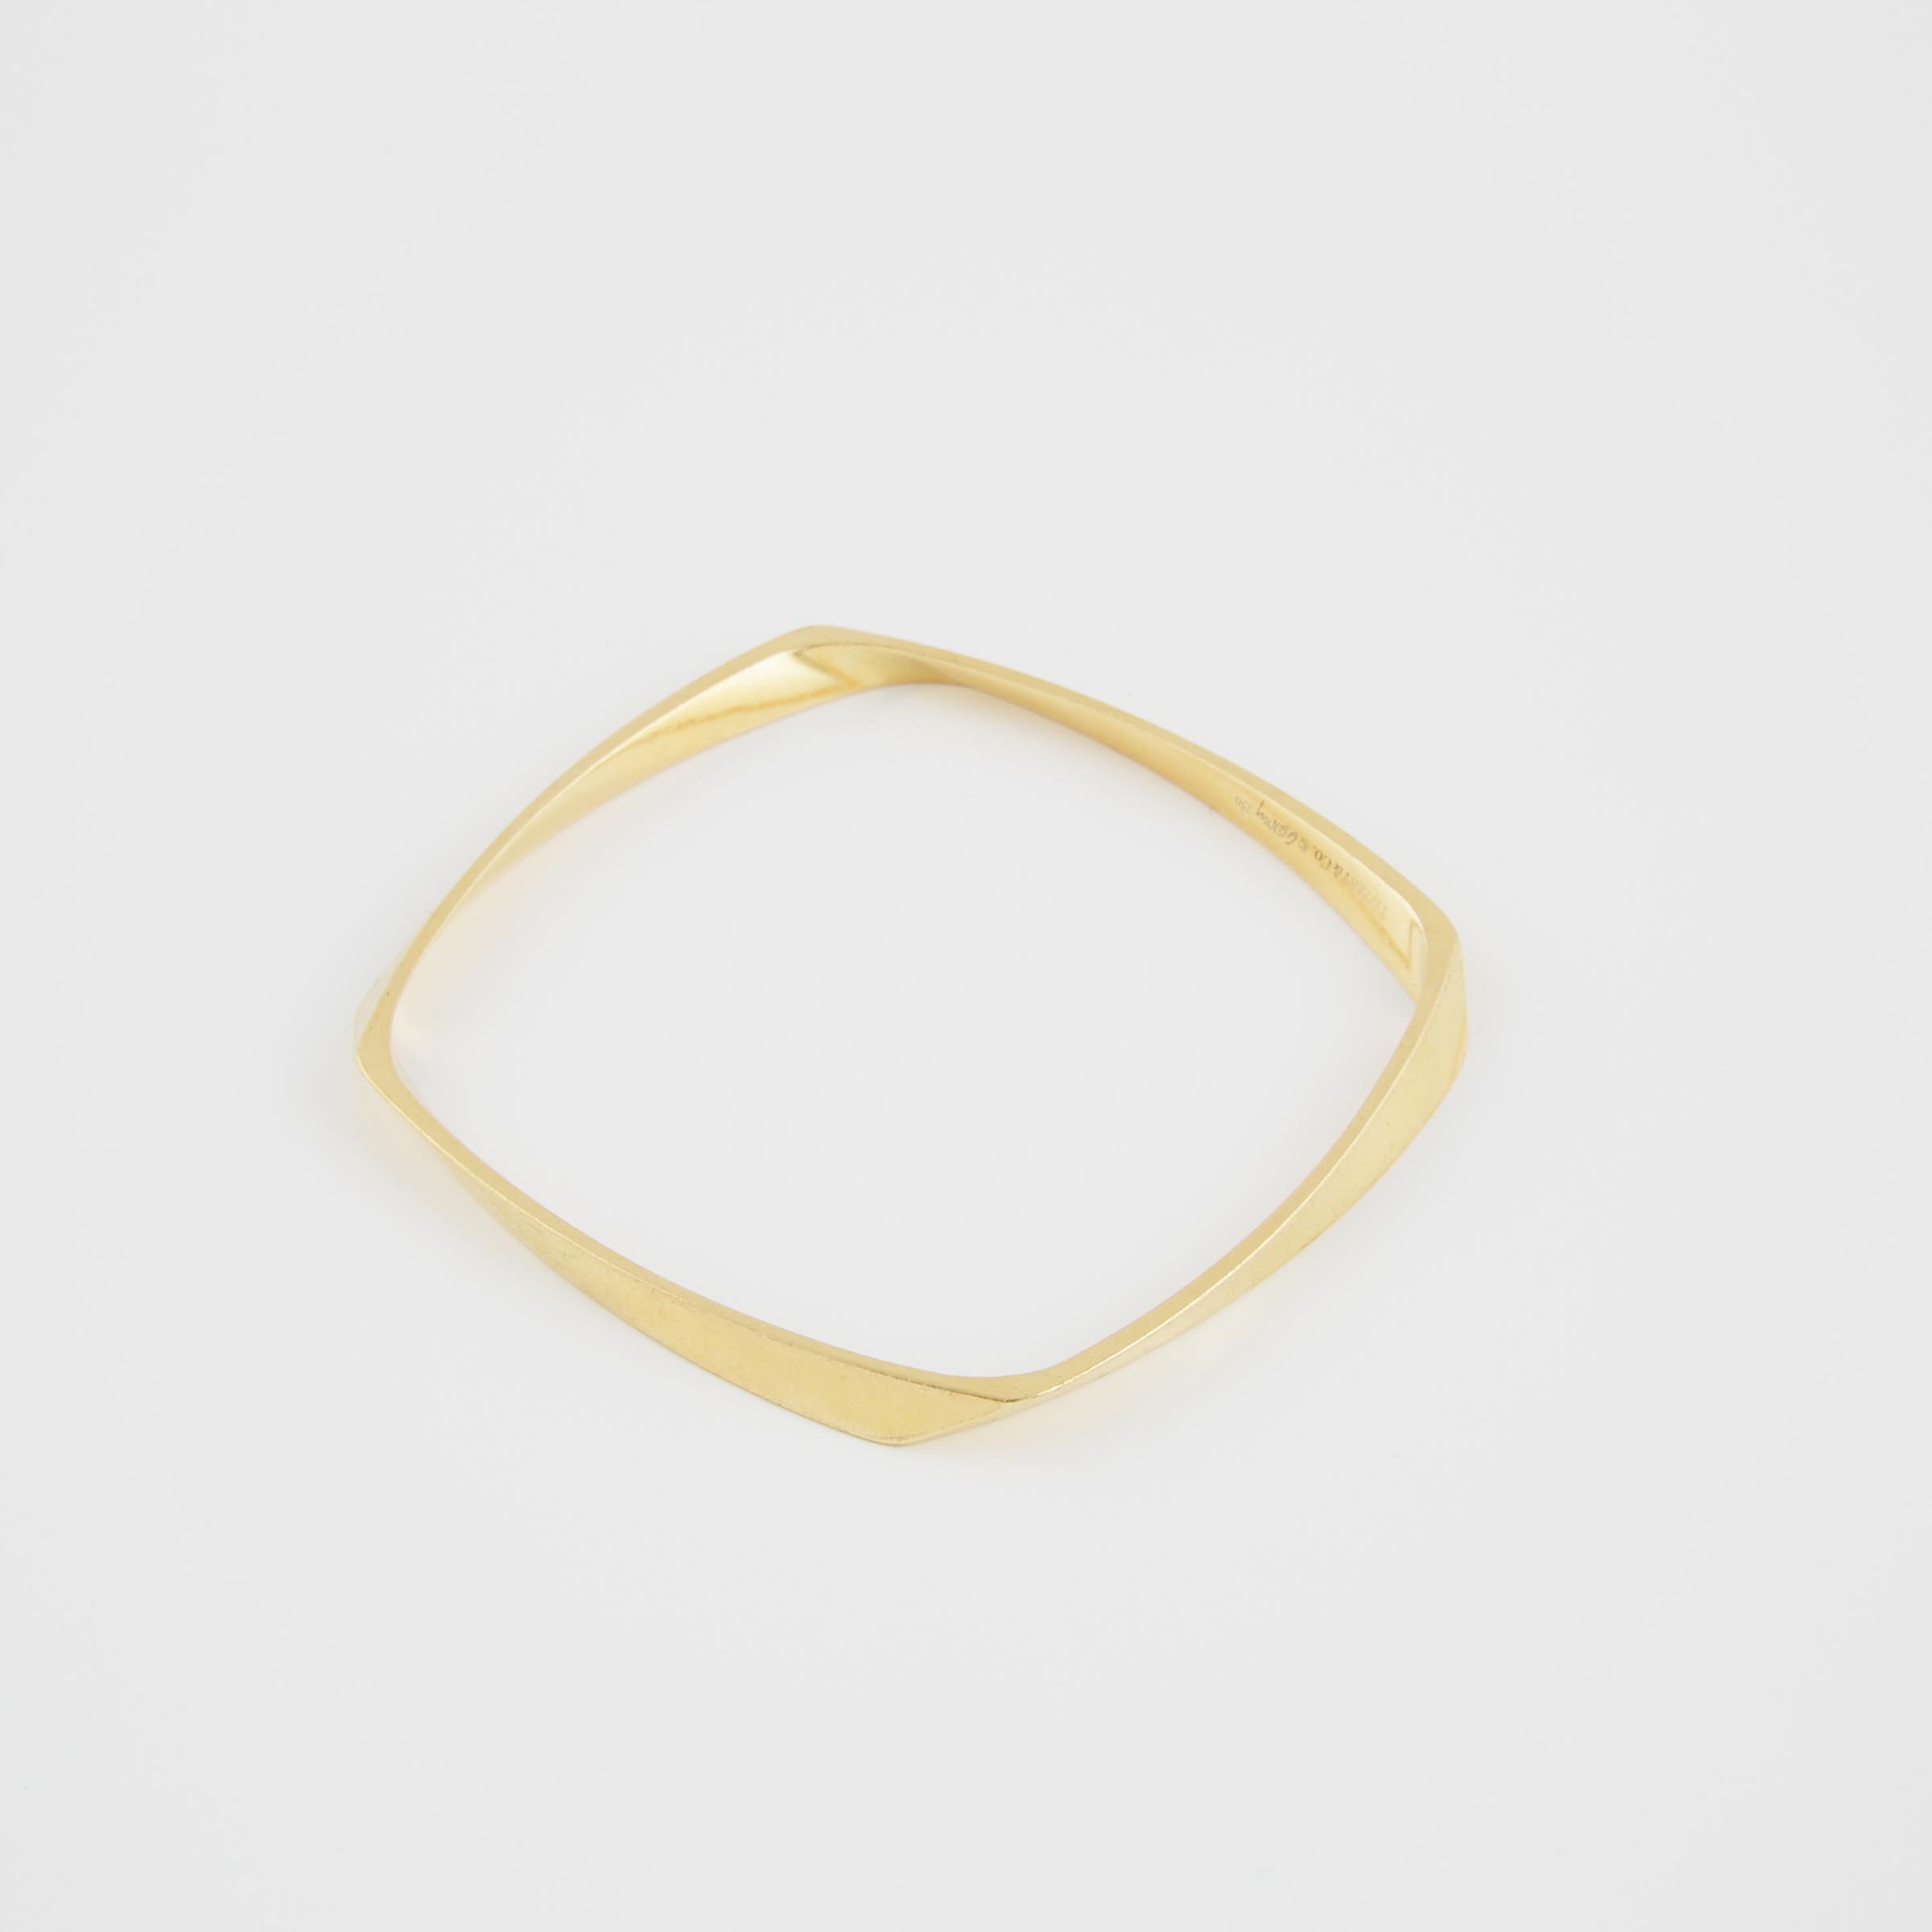 Tiffany & Co. Frank Gehry 18k Yellow Gold Torque Bangle